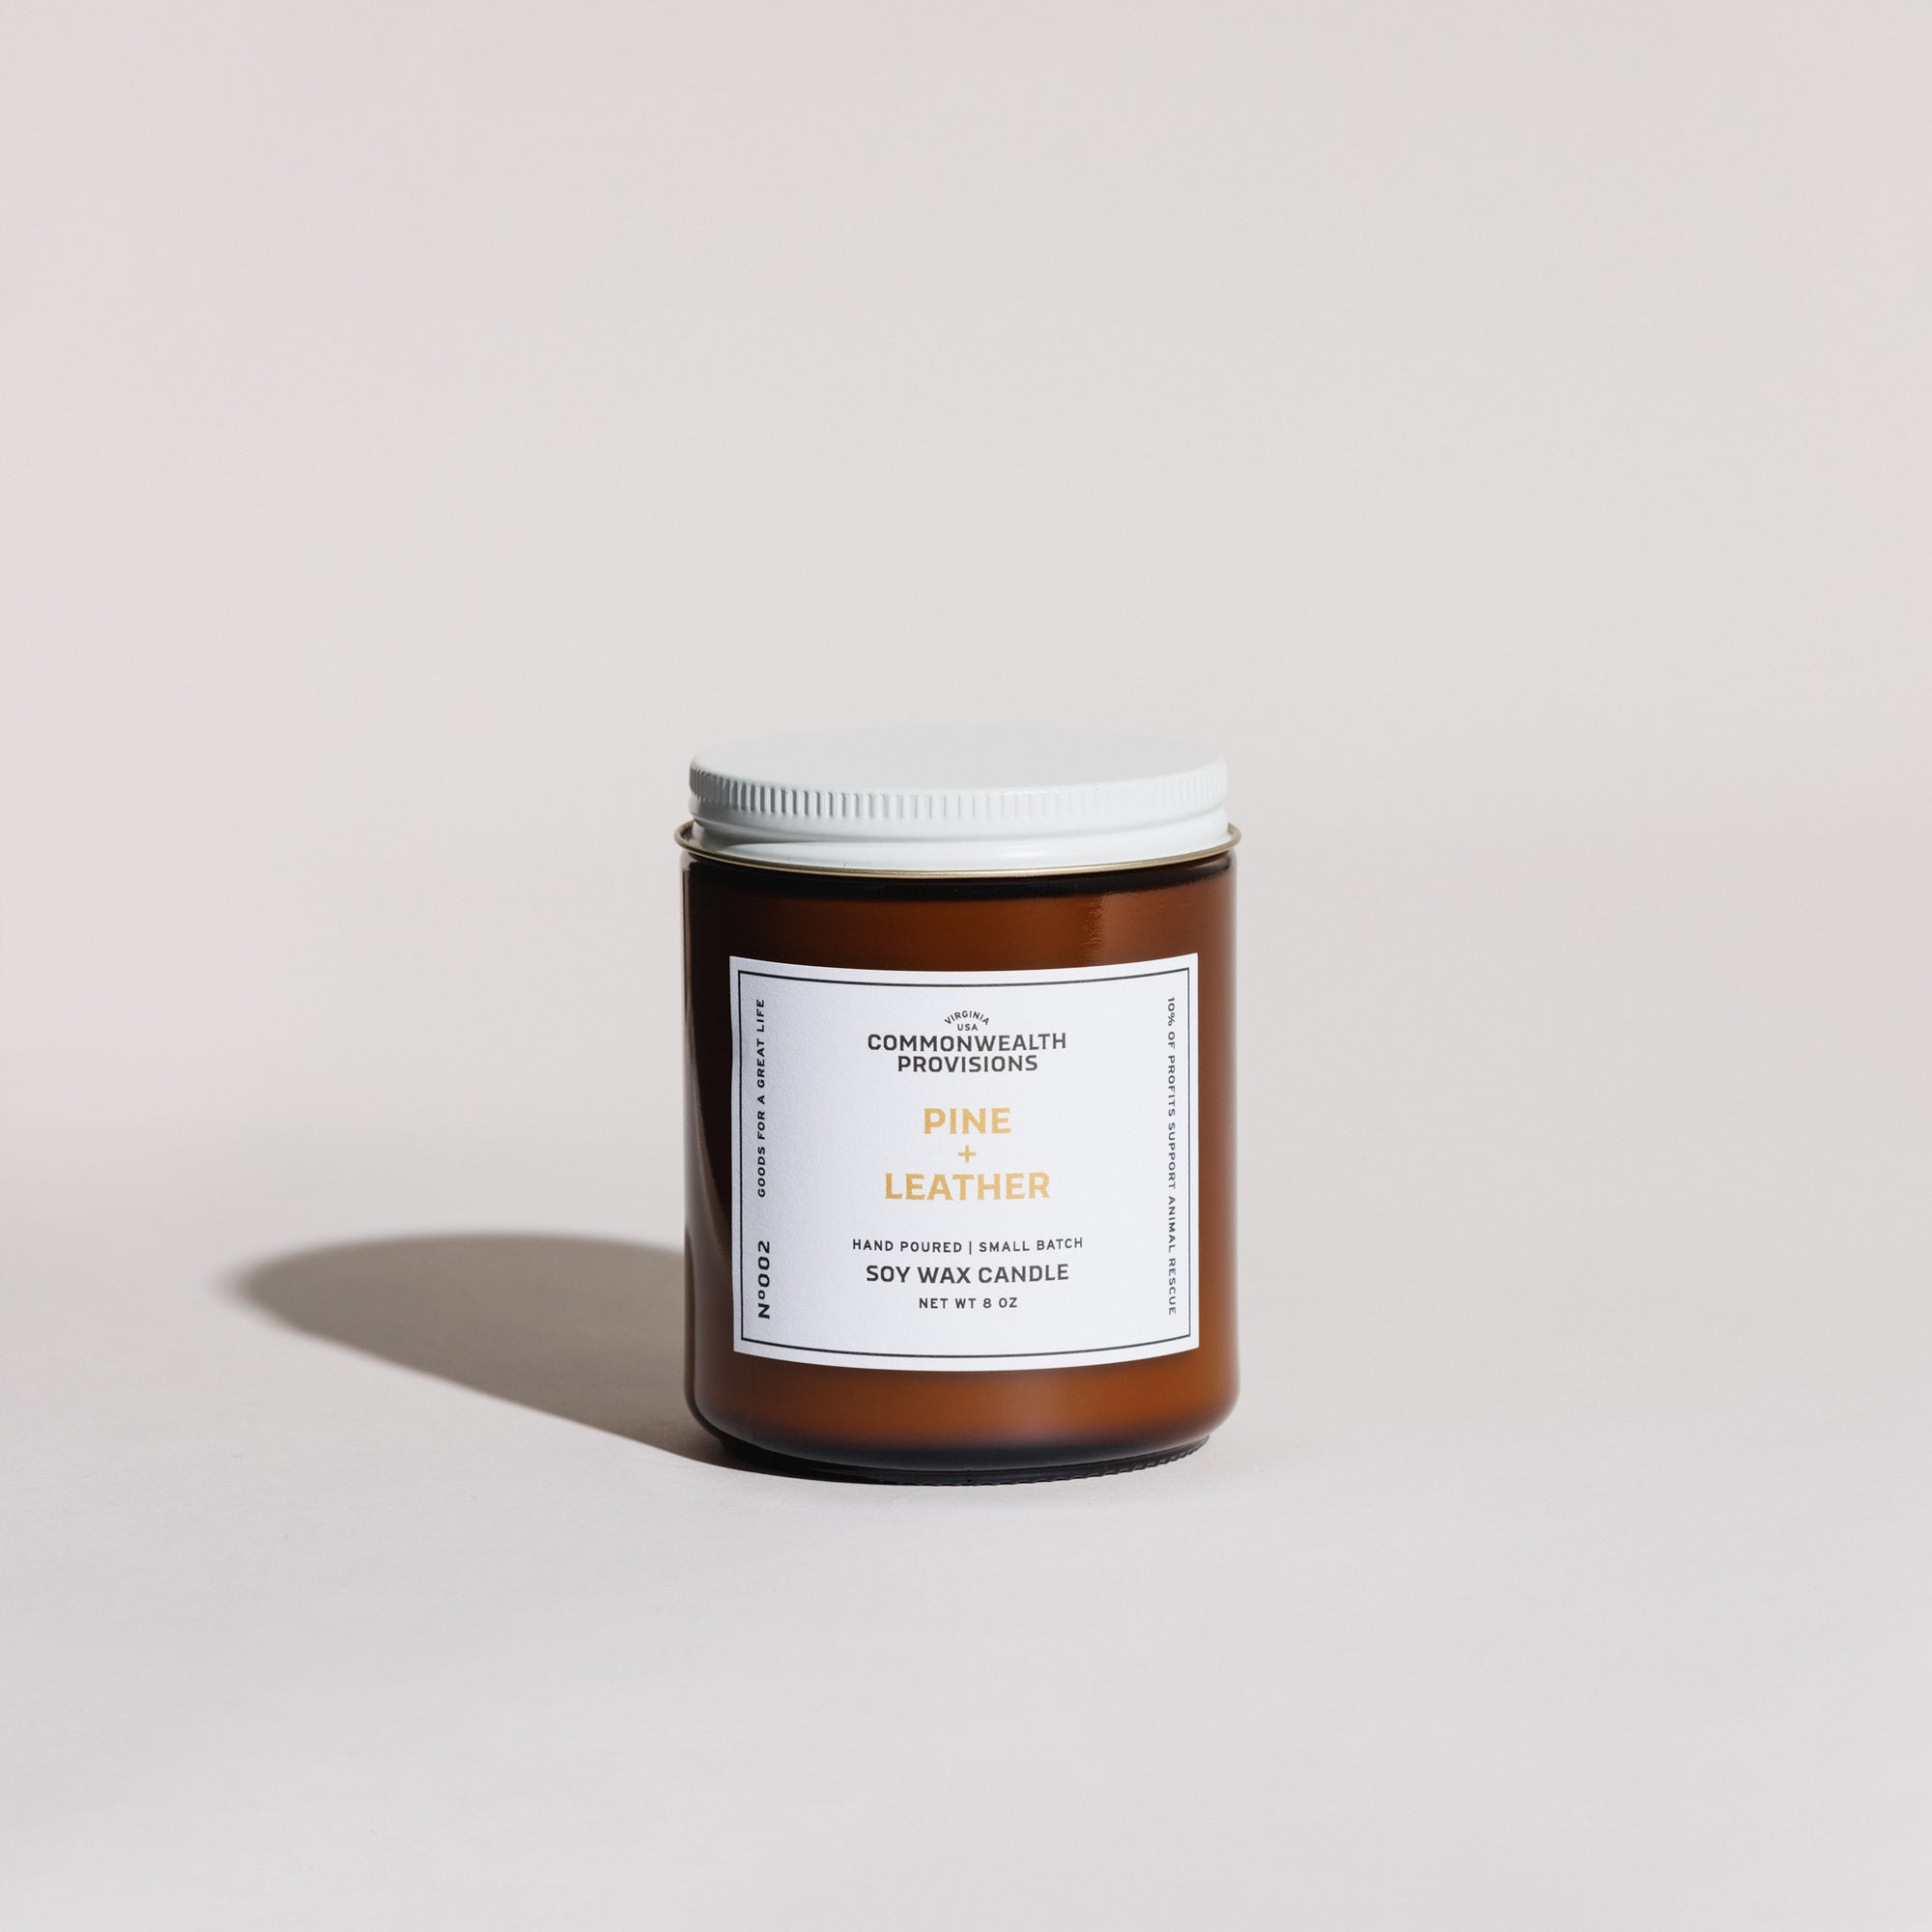 Pine + Leather Standard Candle | Commonwealth Provisions